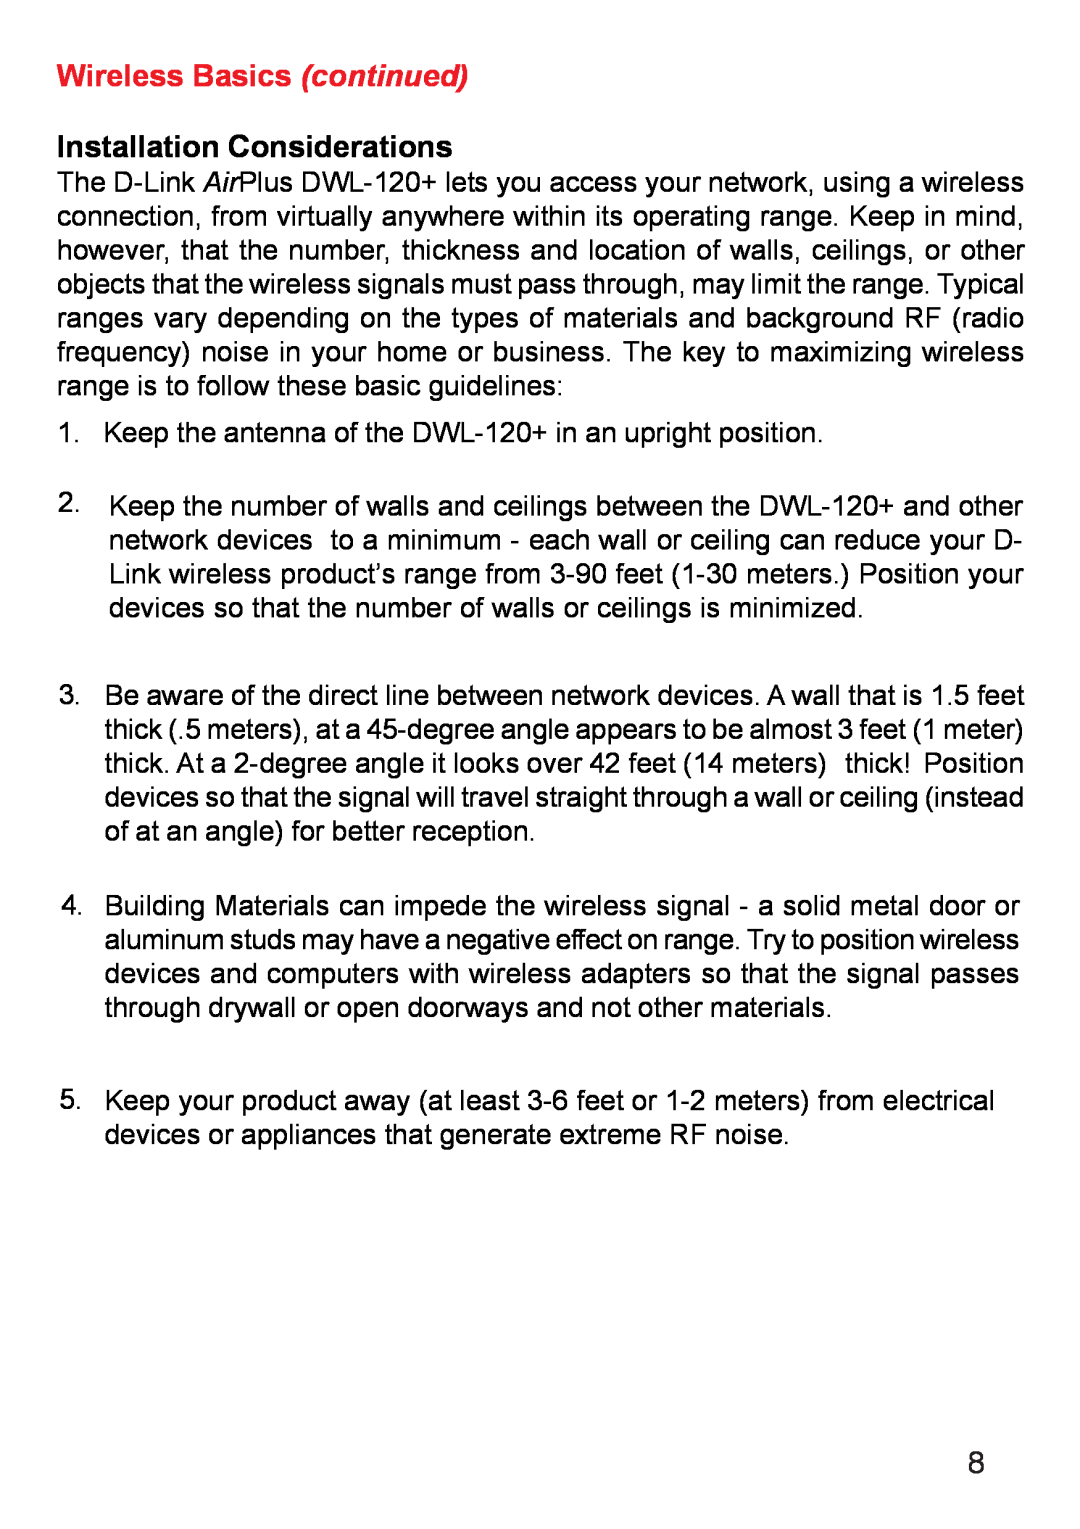 D-Link DWL-120+ manual Installation Considerations, Wireless Basics continued 